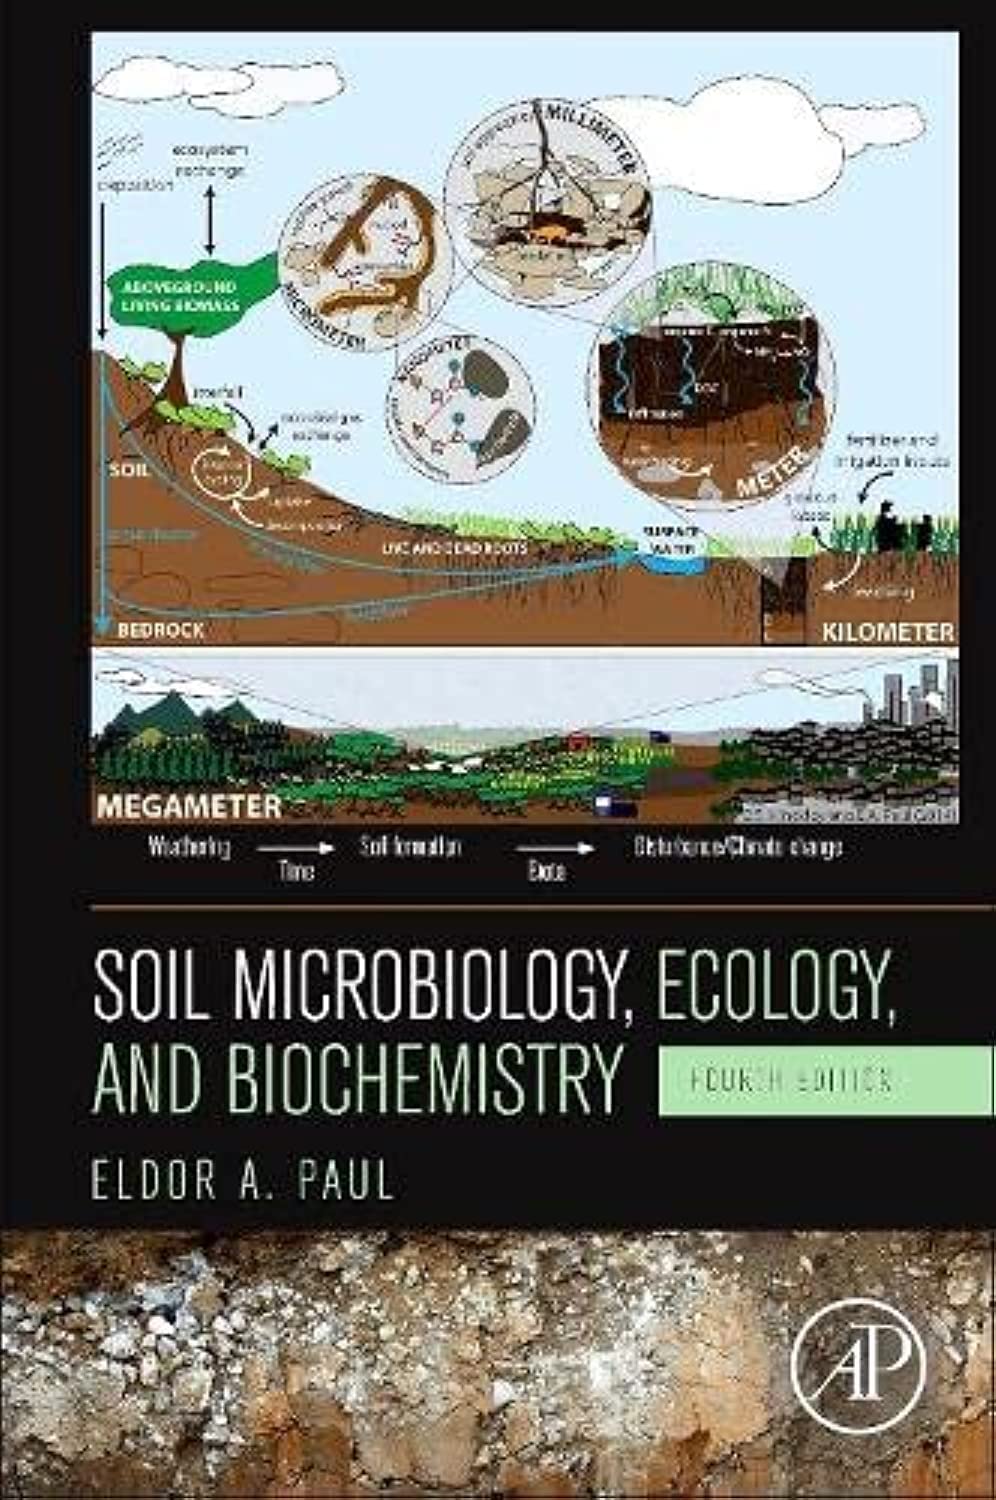 Soil Microbiology, Ecology and Biochemistry, Fourth Edition